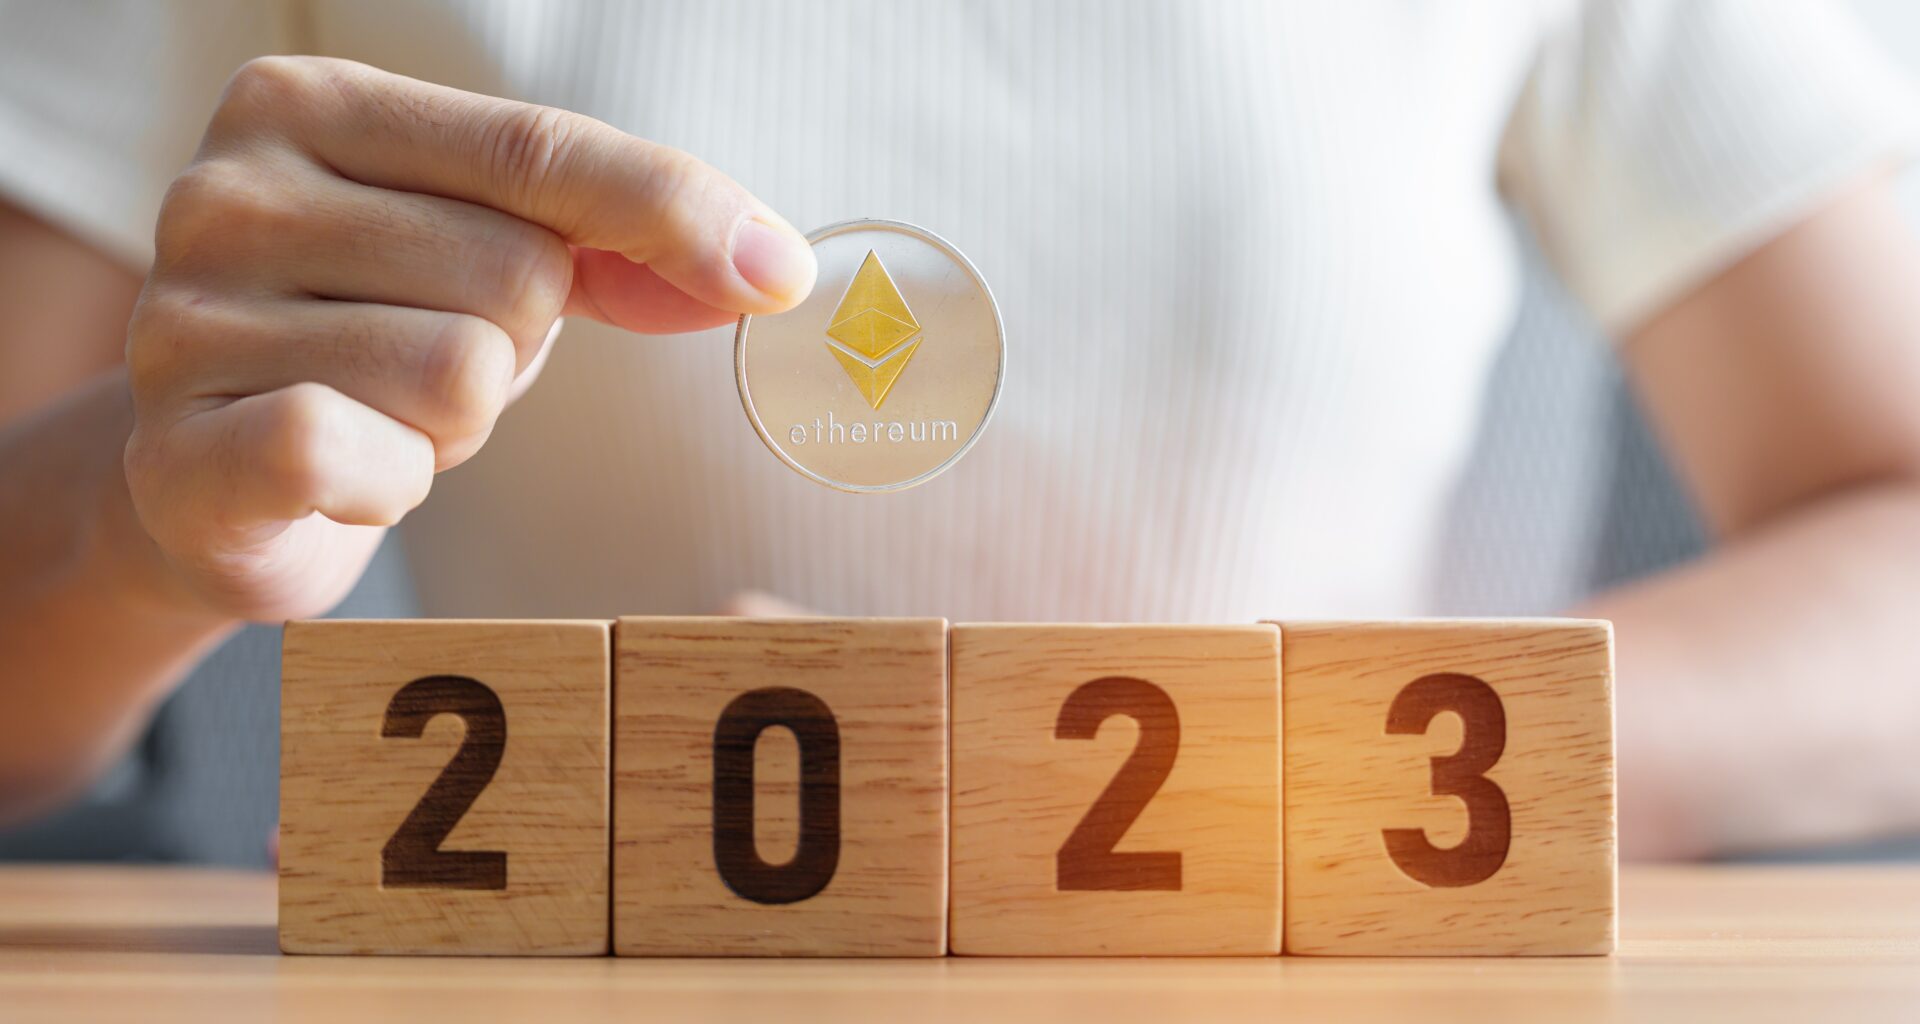 A person in a white shirt is holding up a gold Ether coin above blocks that say "2023".